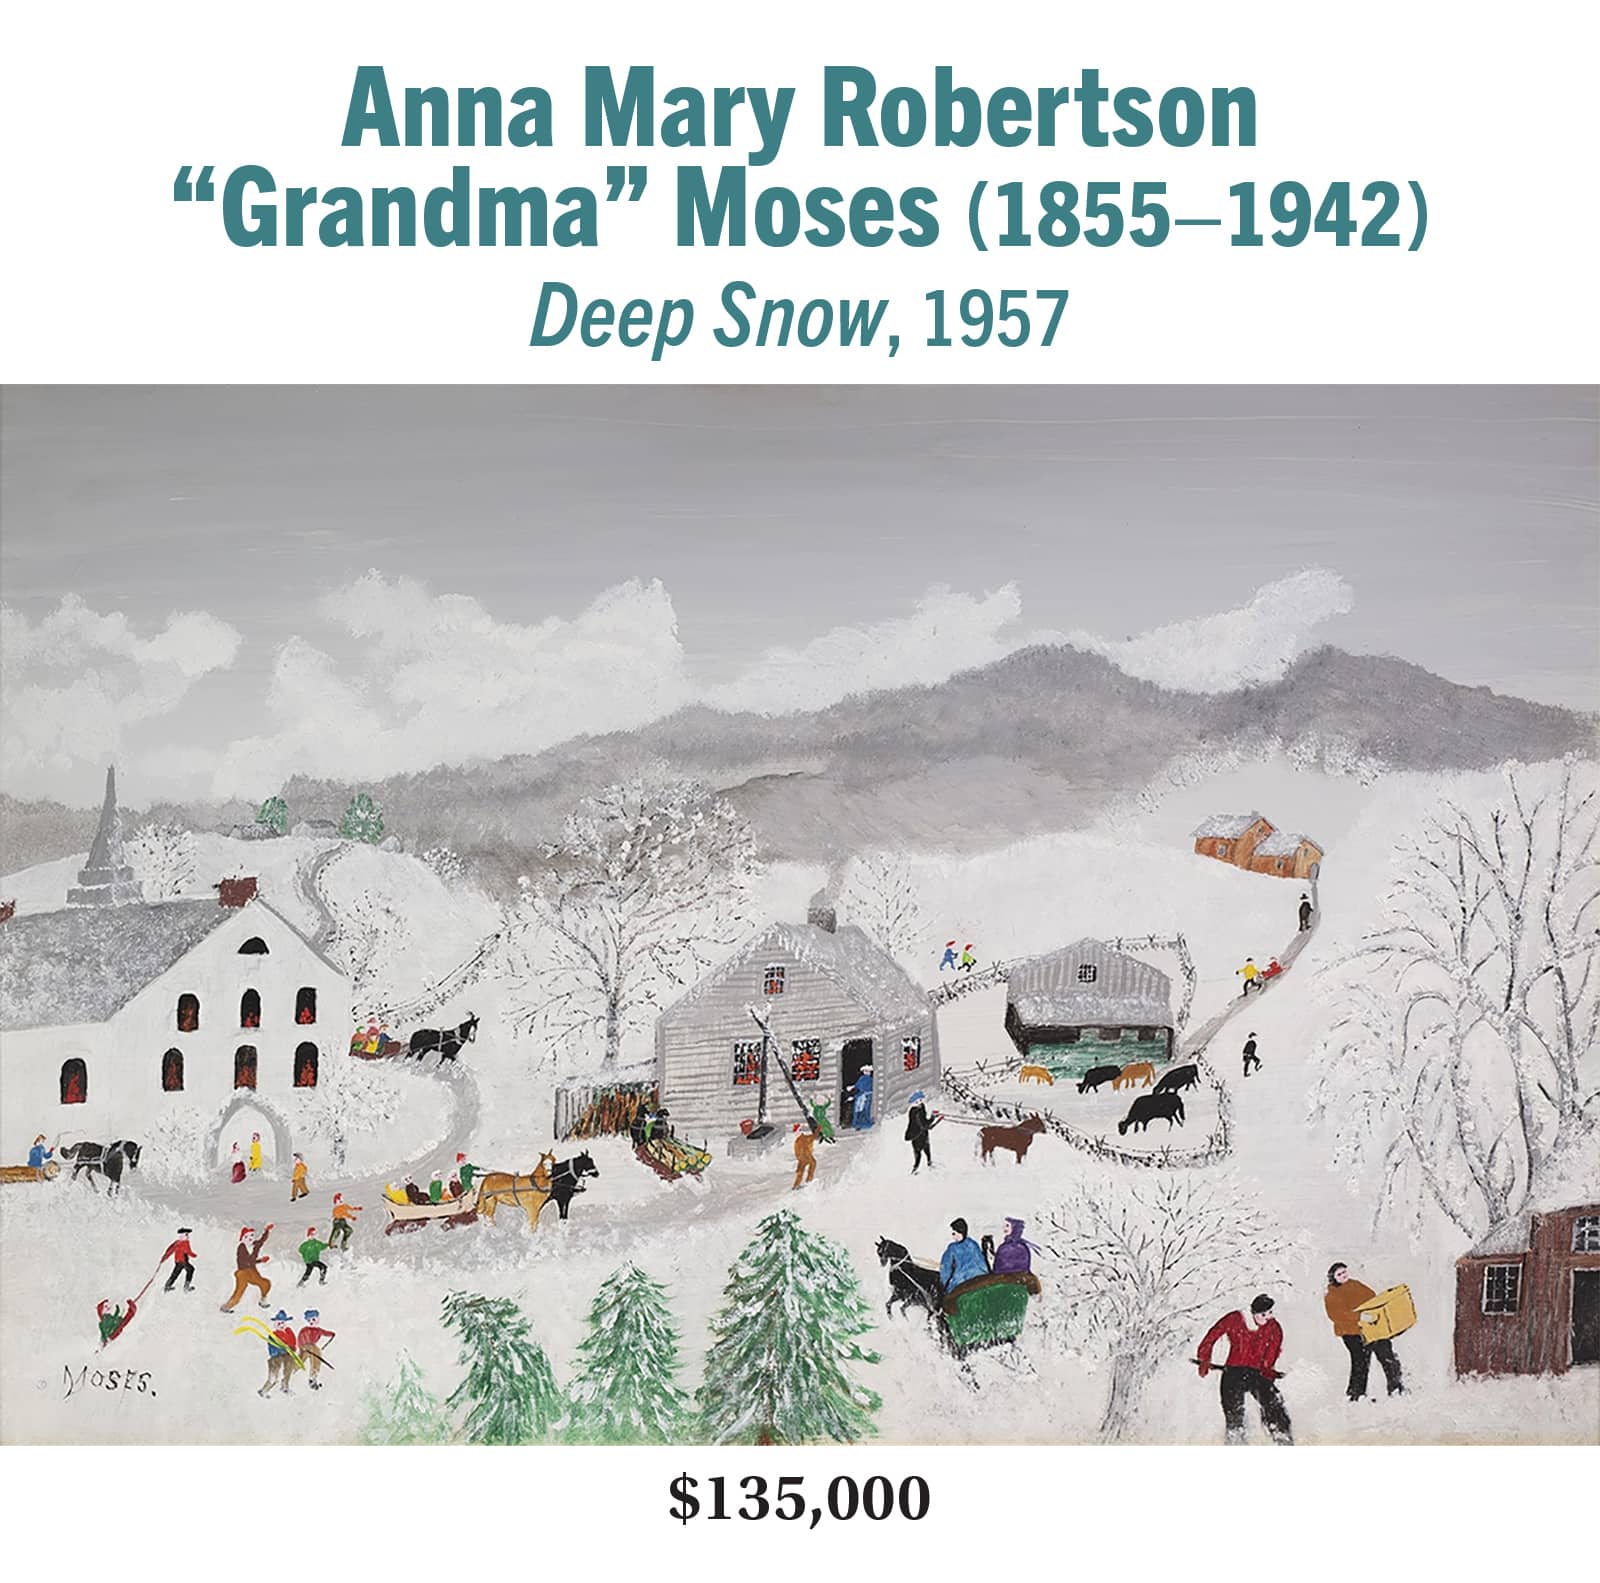 Anna Mary Robertson Grandma Moses 18601961 Deep Snow 1957 oil on board American modernist landscape painting